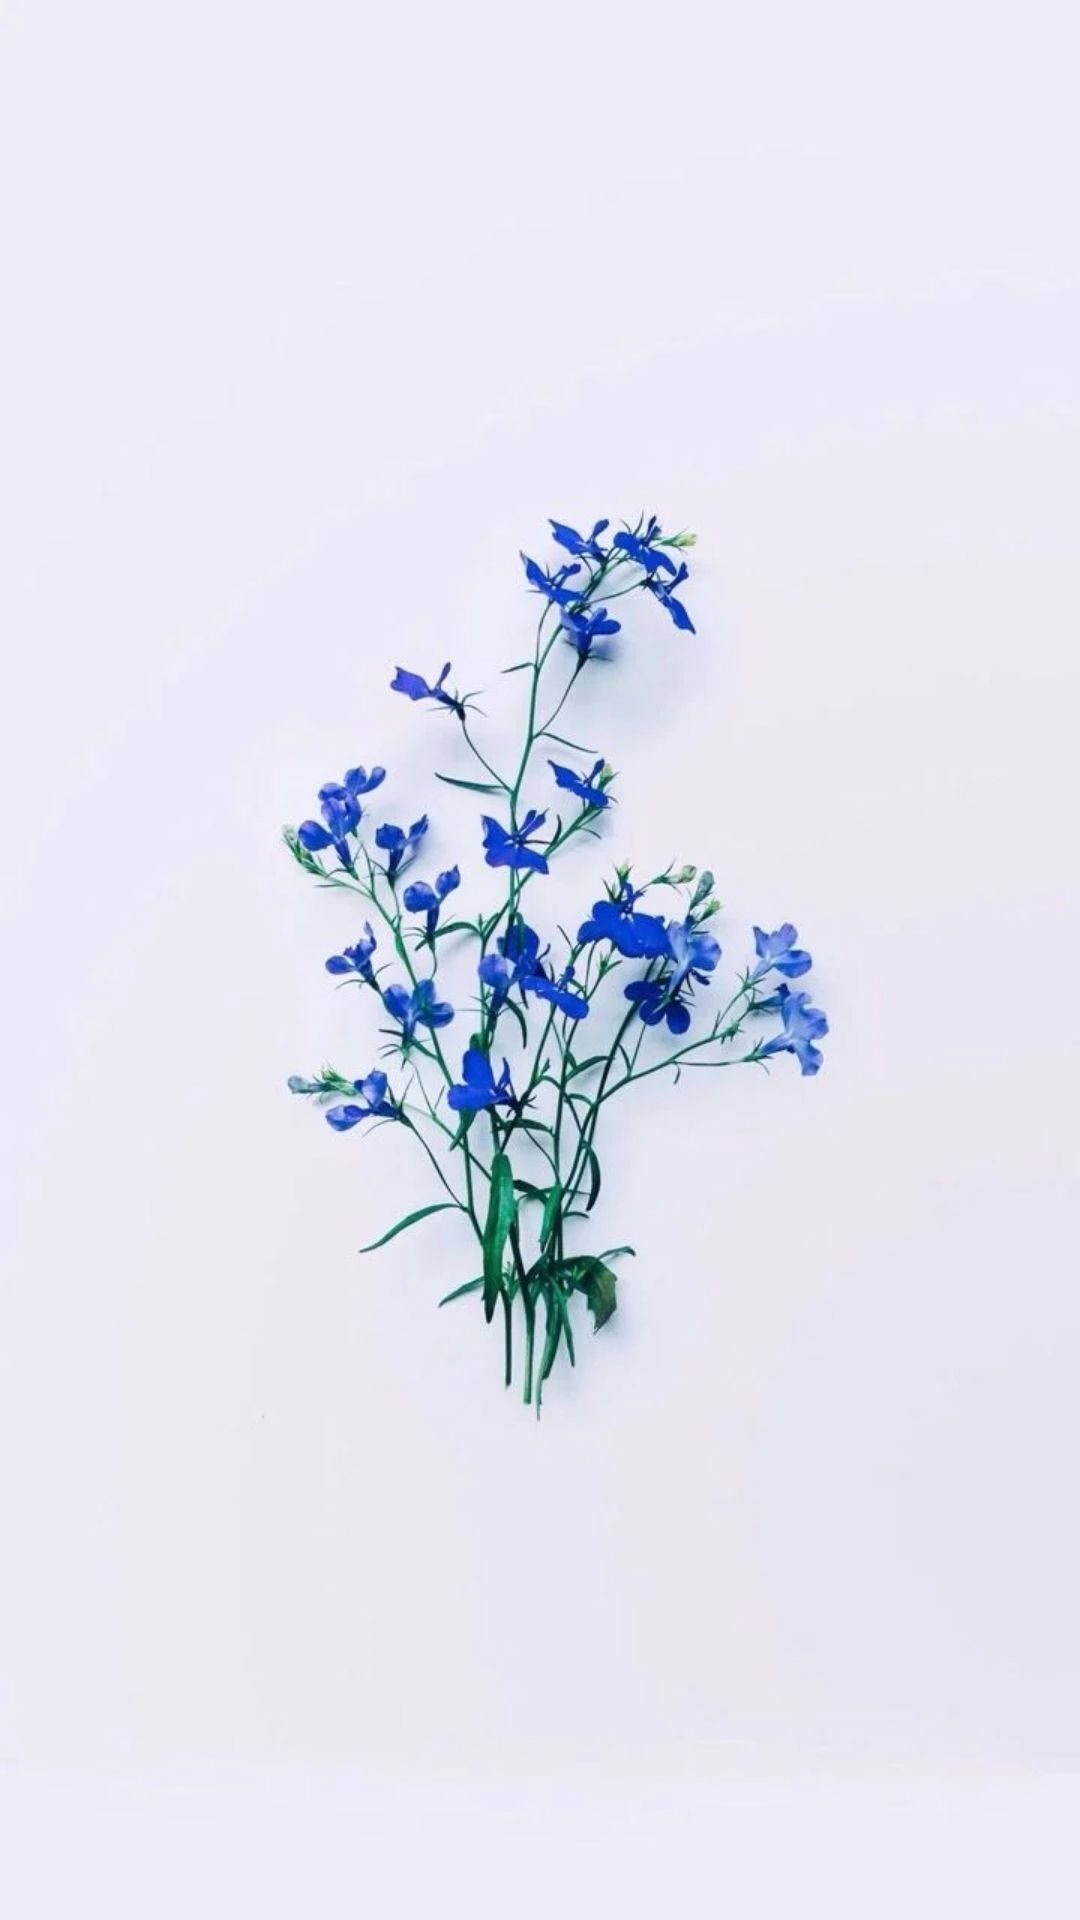 Blue flowers on a white background - Flower